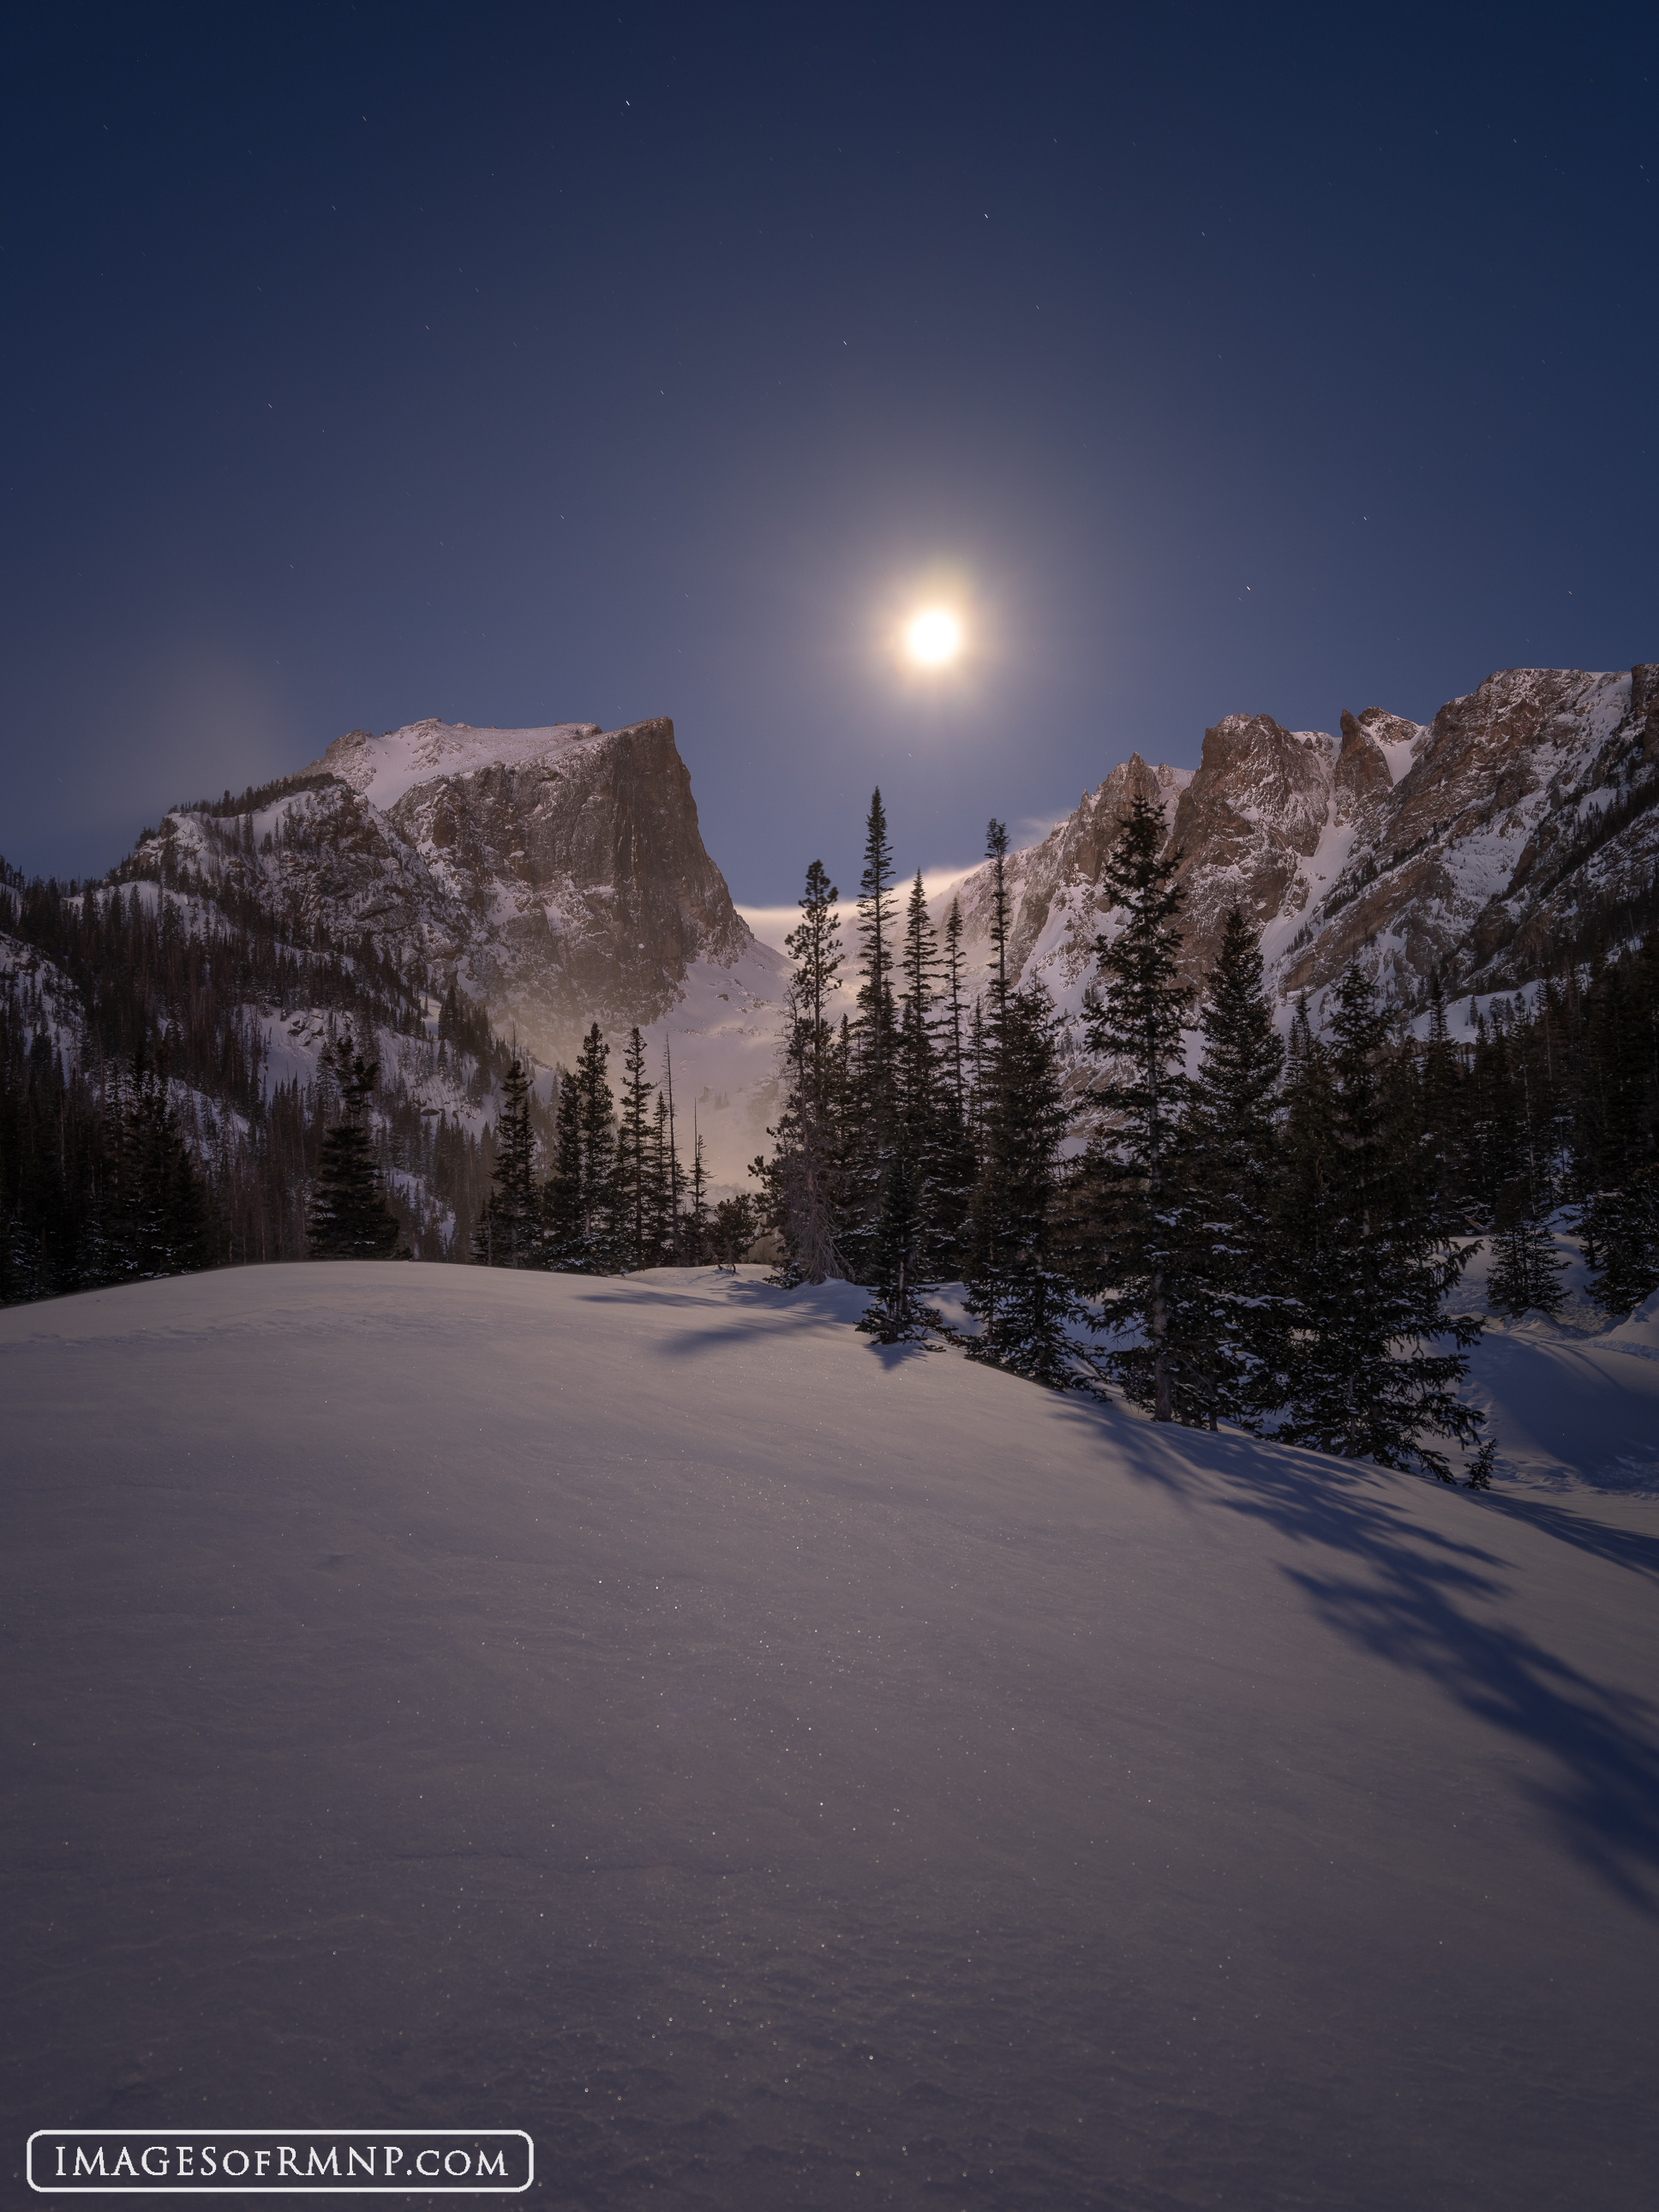 Hallett Peak and Flattop Mountain are gently warmed by the predawn light from the east. At the same time a full moon sets between...